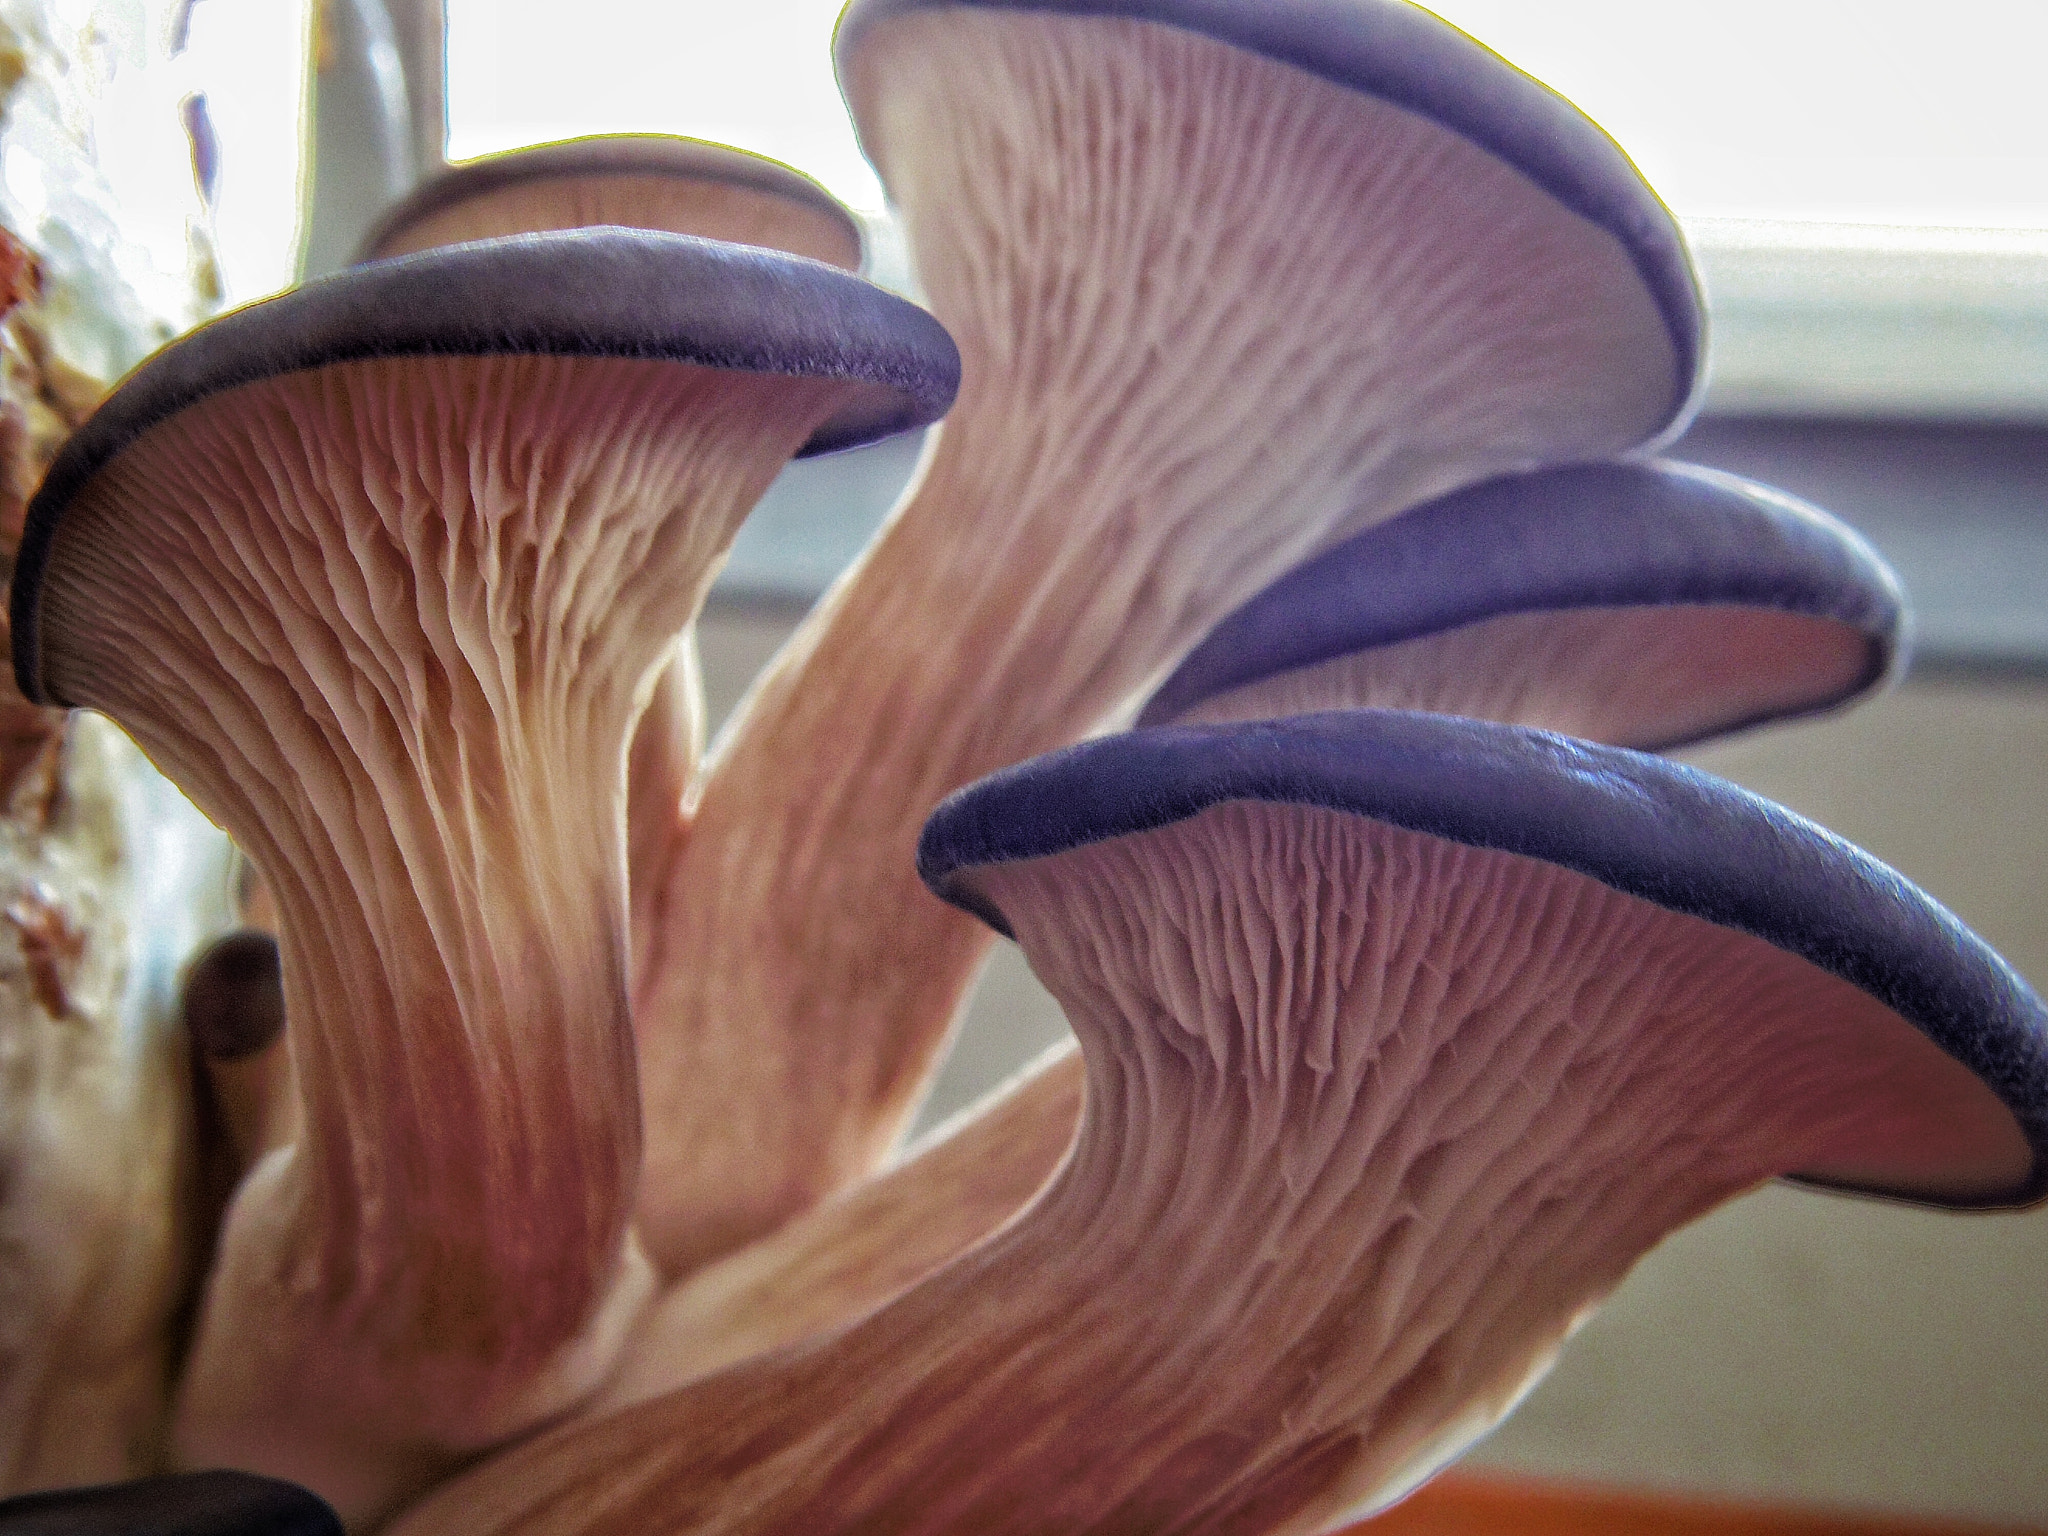 Pentax Q + Pentax 01 Standard Prime sample photo. Home-grown pearl oyster mushrooms photography